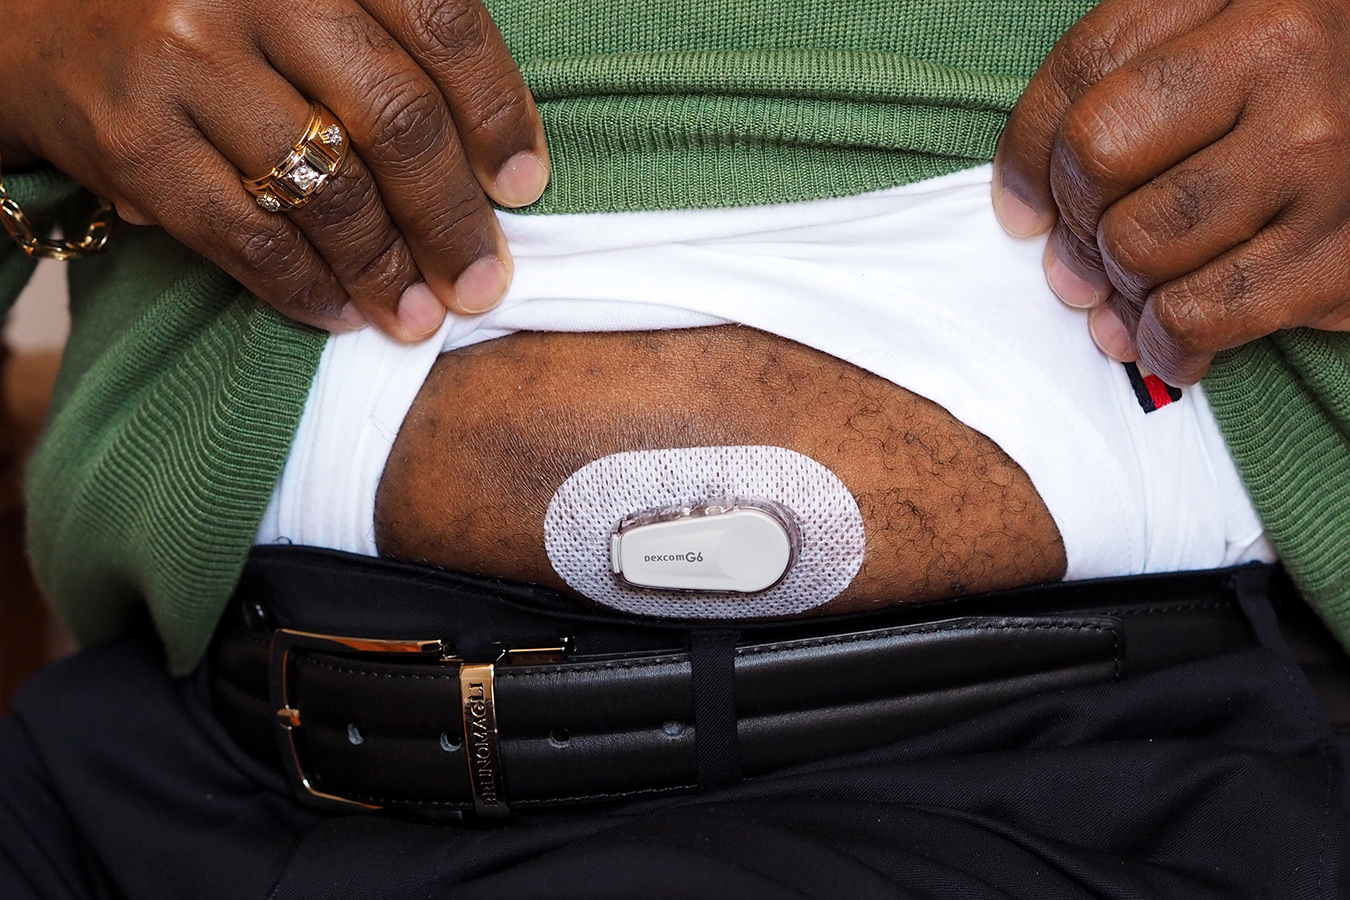 ‘Painless’ Glucose Monitors Pushed Despite Little Evidence They Help Most Diabetes Patients